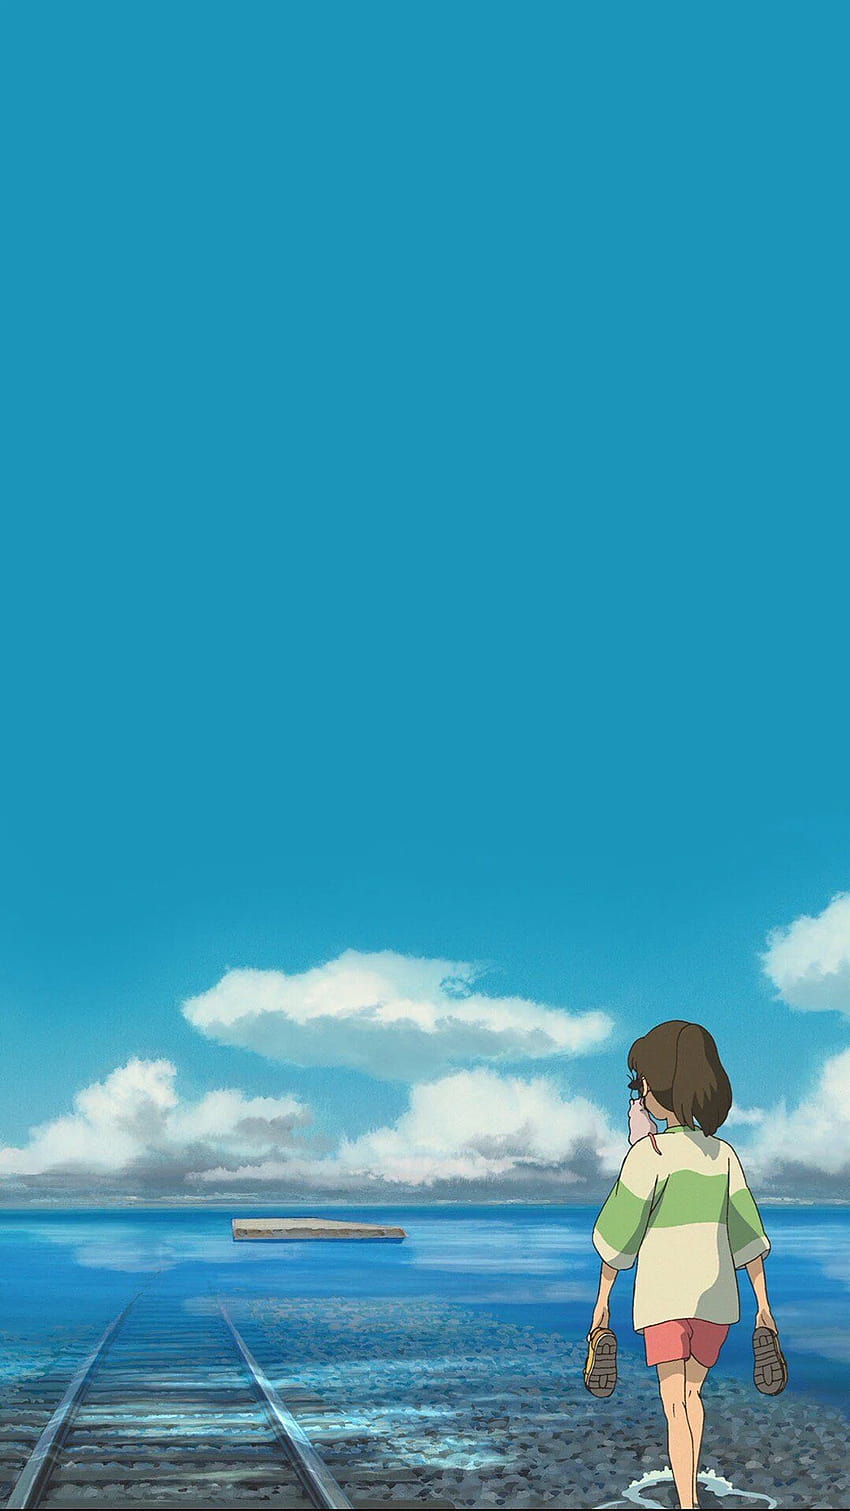 Spirited Away posted by Ethan Walker, iphone spirited away aesthetic HD phone wallpaper